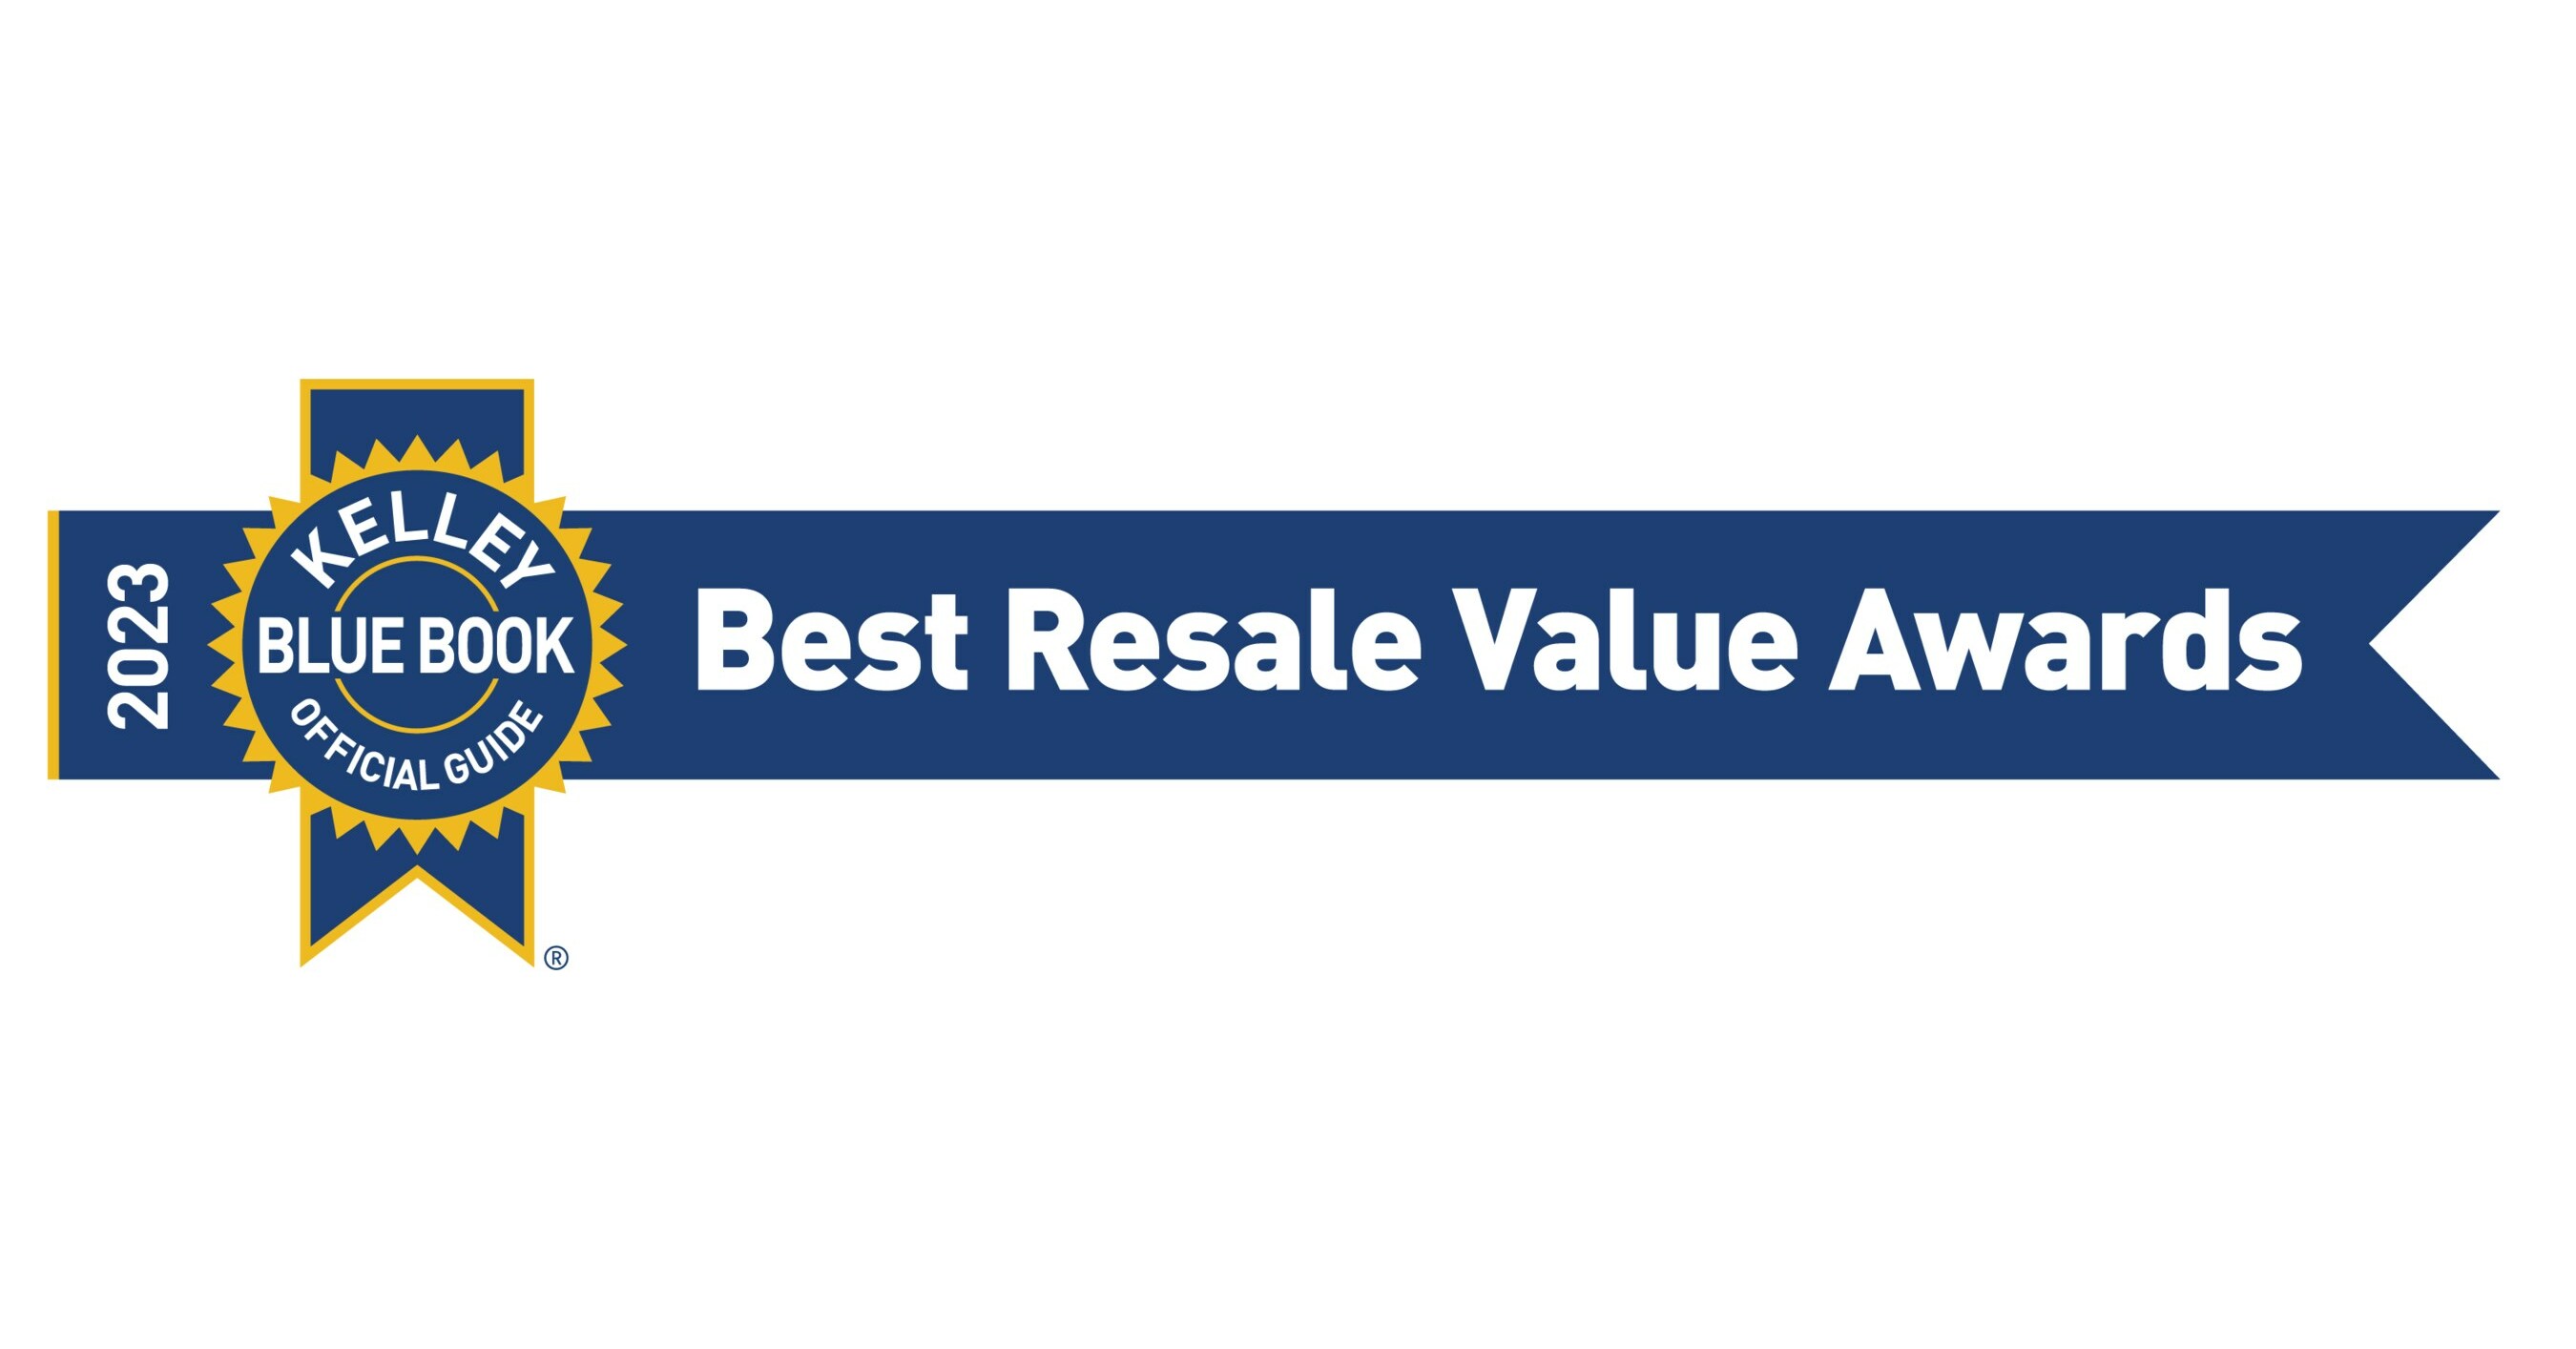 Vehicles With Best Resale Value According to KBB